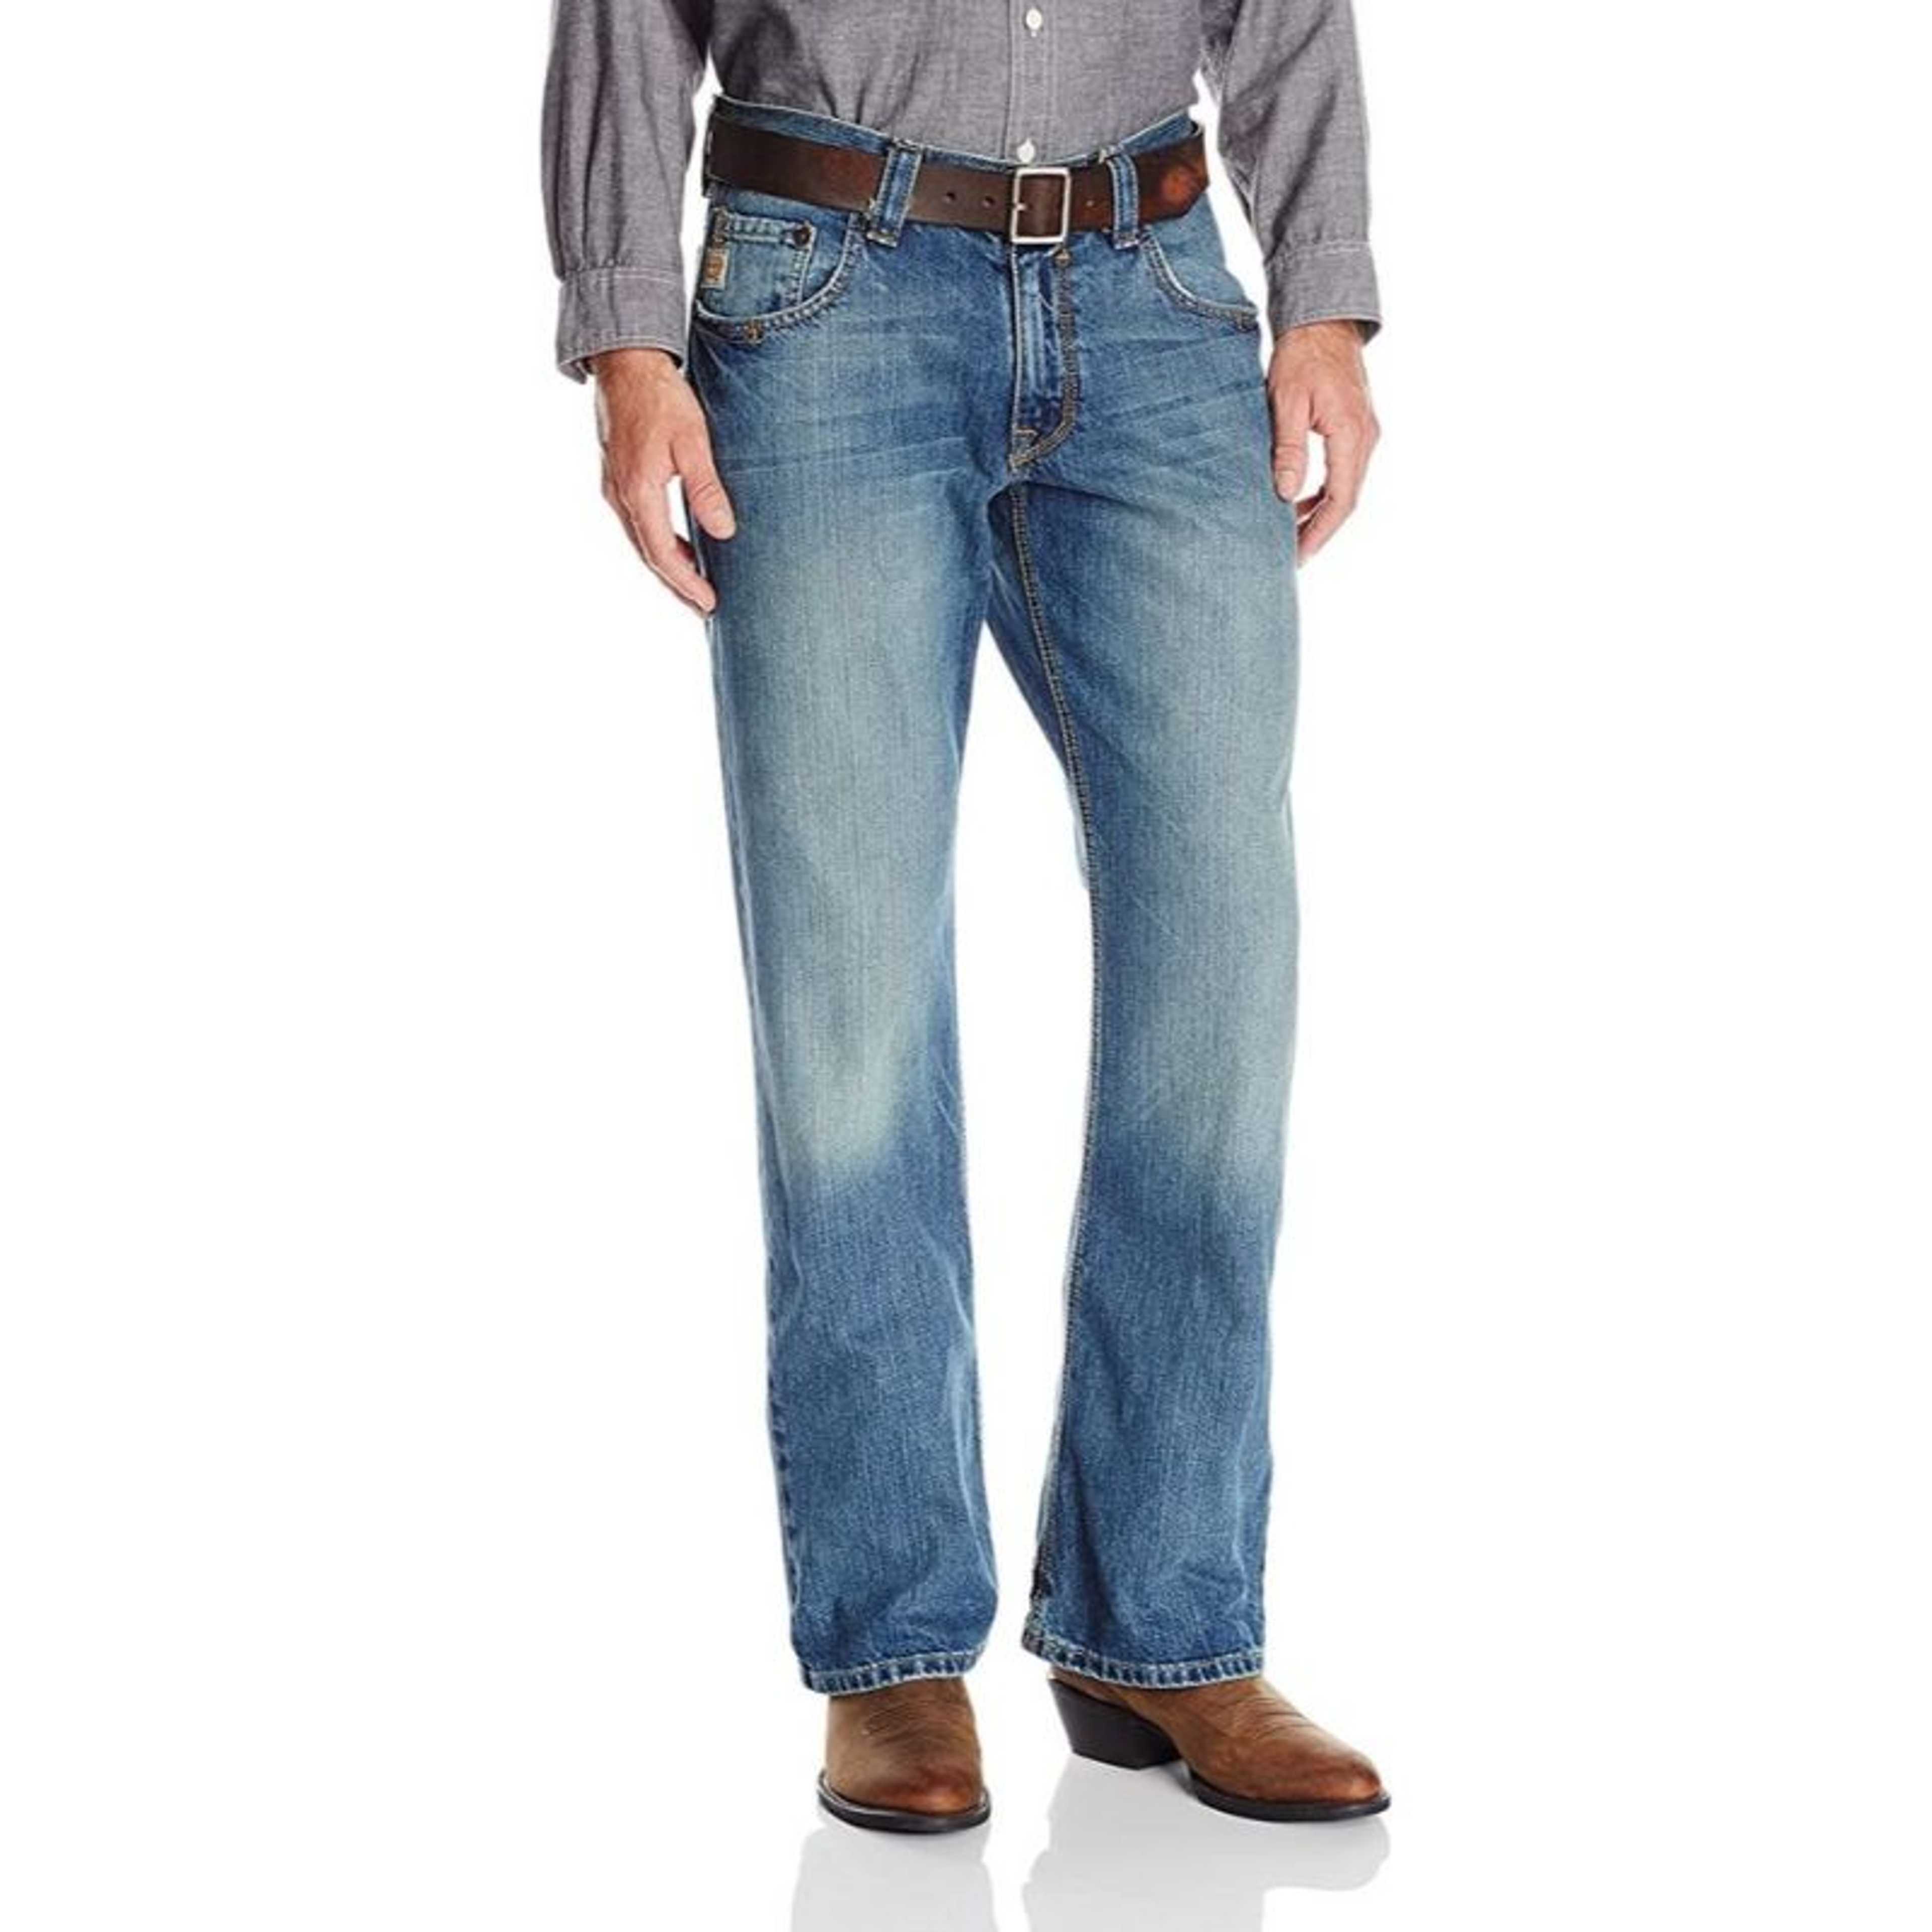 Random Relaxed Jeans For Men Age 18 to 40